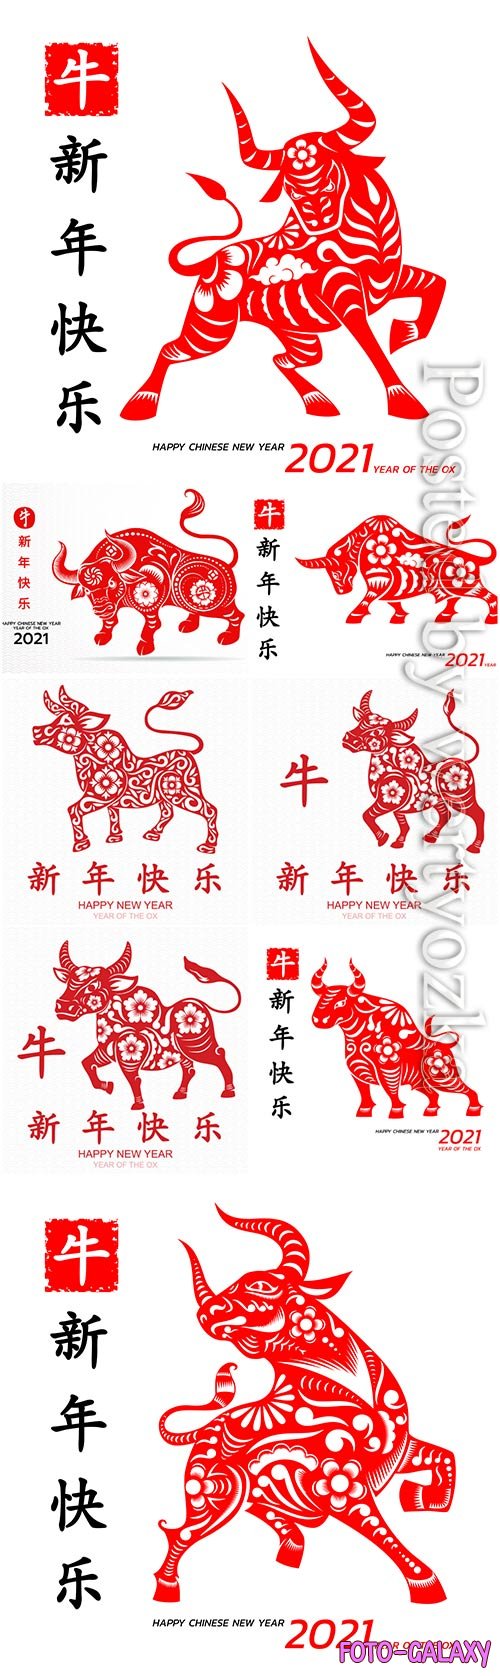 Happy chinese new year vector background 2021